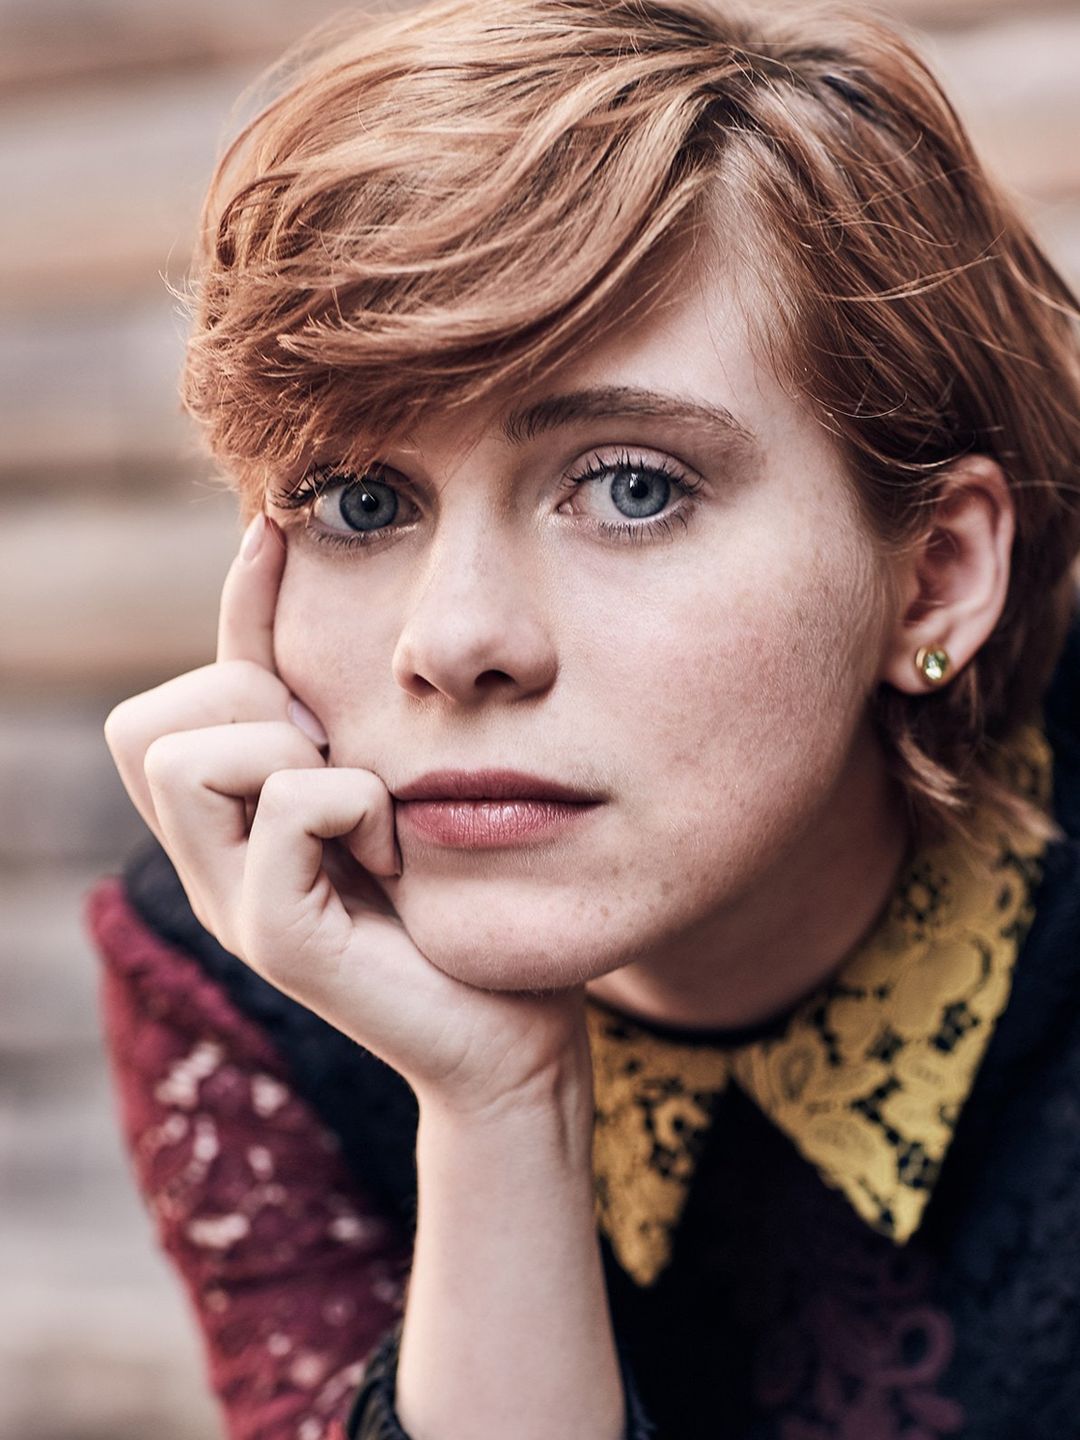 Sophia Lillis who is her mother